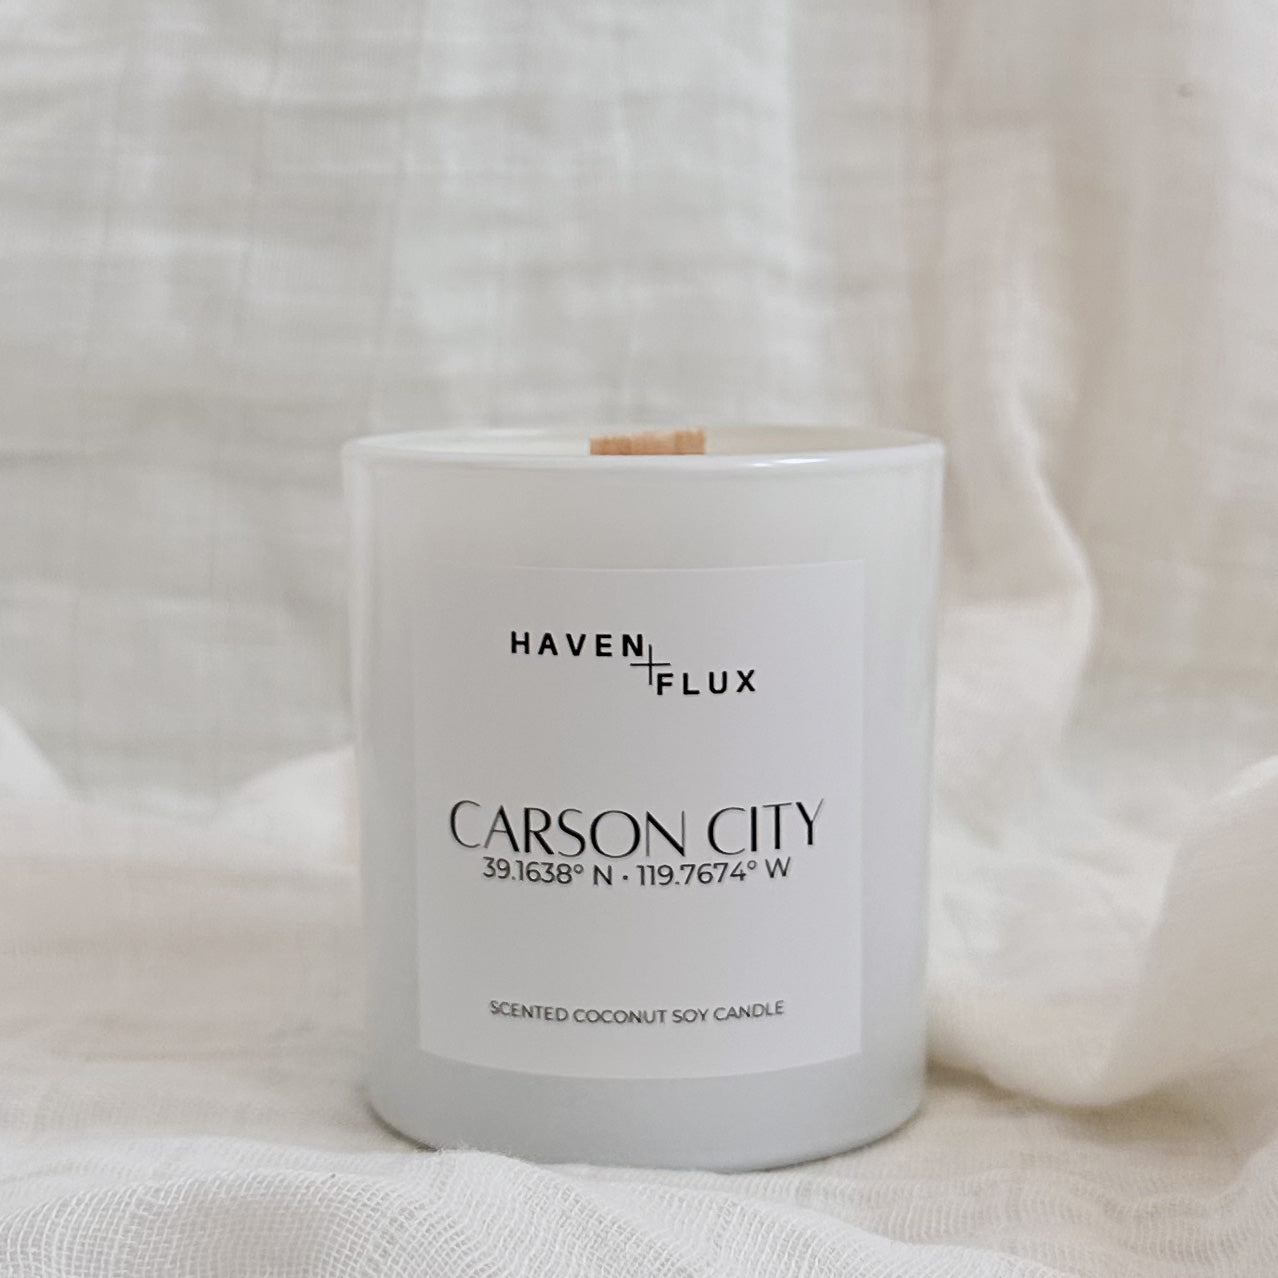 Non-Toxic Coconut Soy Wax Wooden Wick Carson City Nevada Coordinate Candle for Mental Health